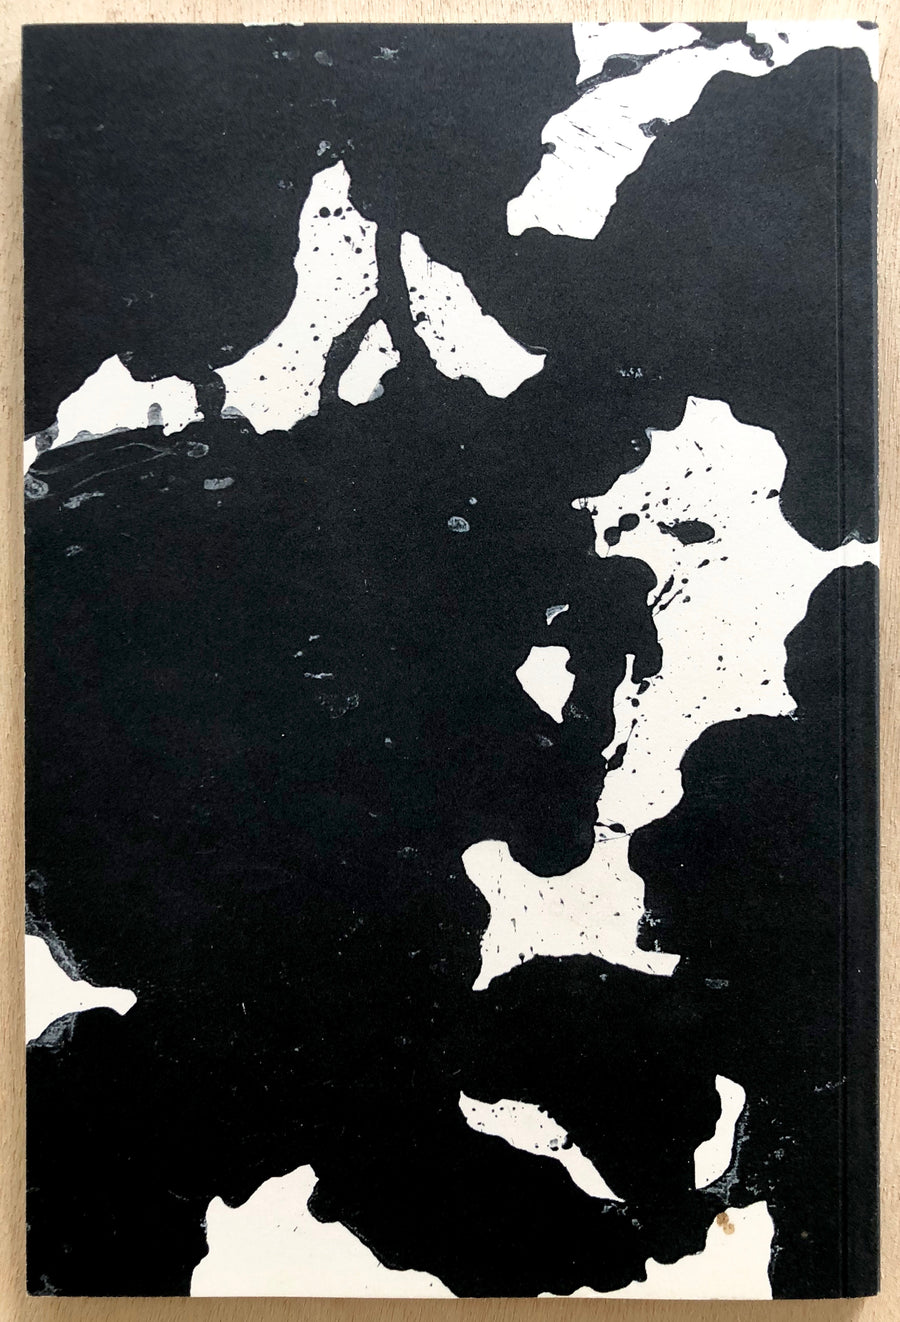 ANDY WARHOL: RORSCHACH PAINTINGS, essay by Rosalind Krauss